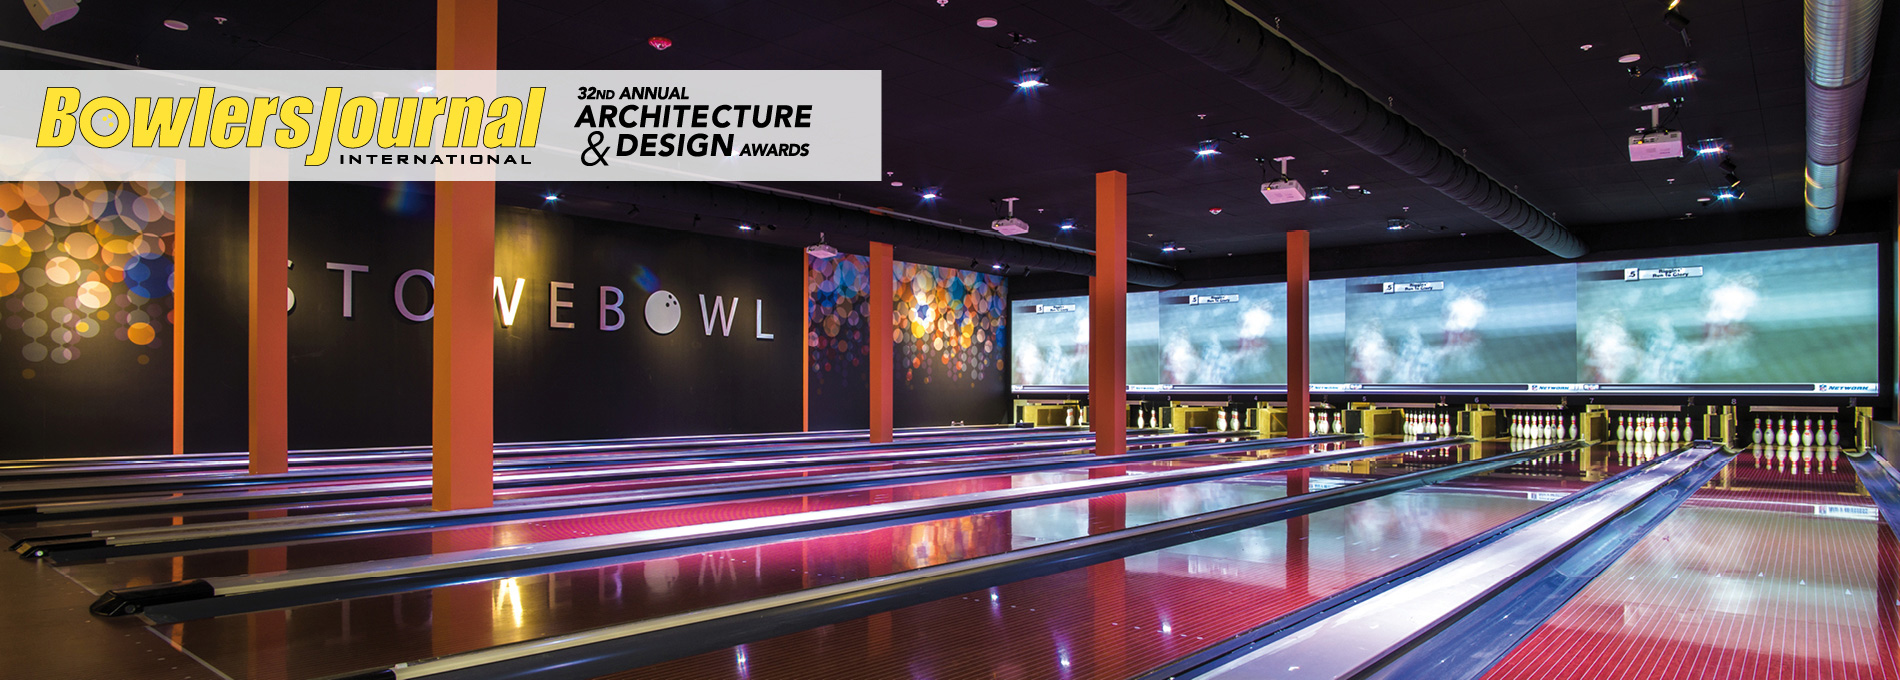 qubicaamf-bowling-32nd-architecture-and-design-awords-banner-STOWE-BOWL.jpg